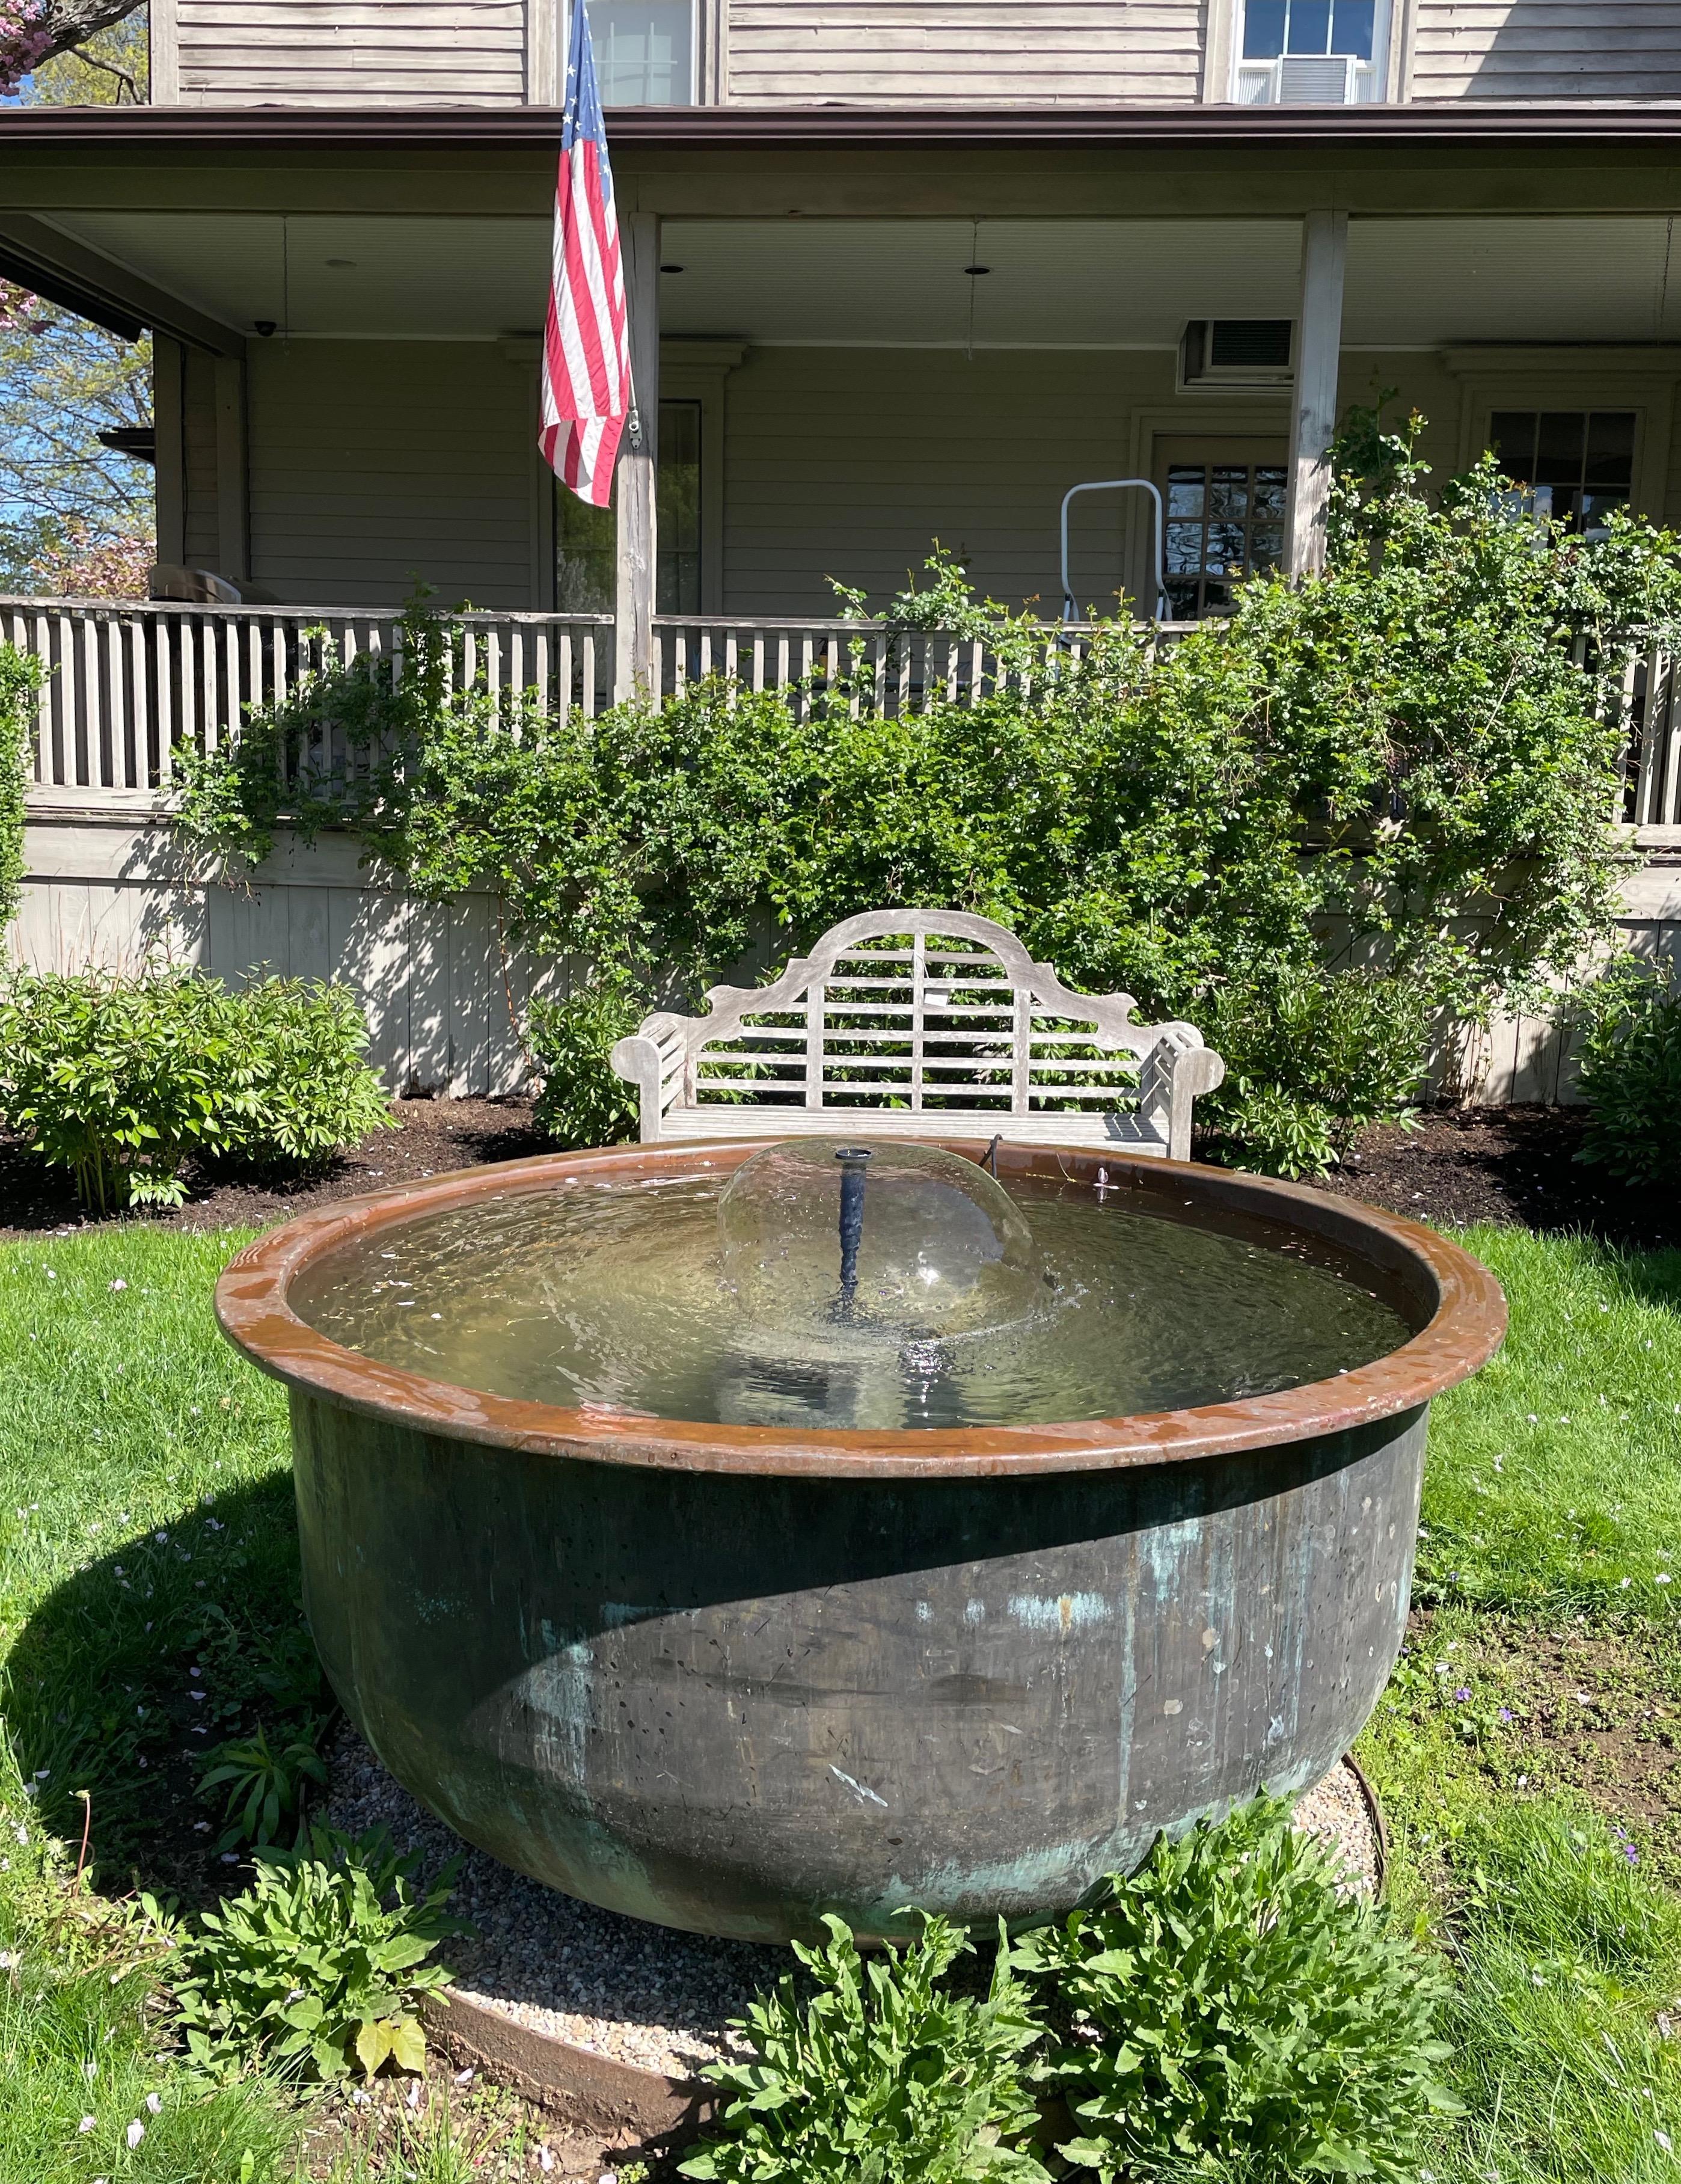 We adore copper cheese vats, particularly since they make such exceptional garden focal points and can serve as fountains, planters, hot tubs or fire pits. This one is stunning and features a beautiful untouched blackened patina with some verdigris